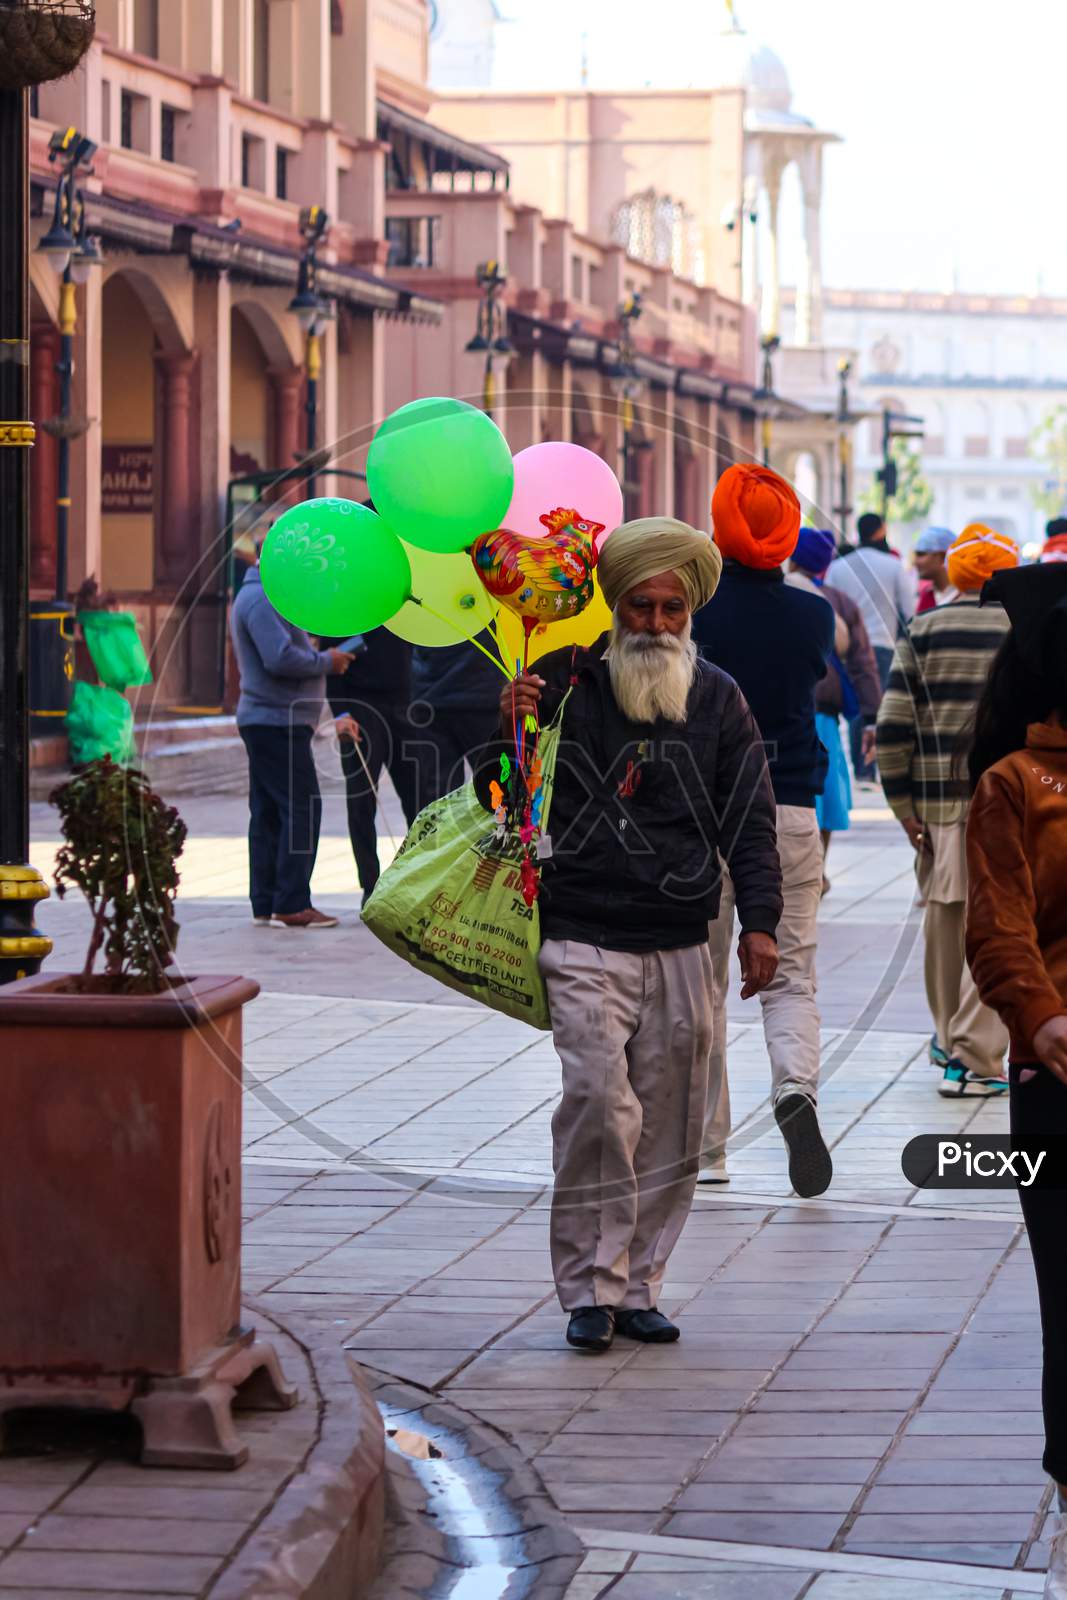 An old man vendor selling balloons on the street